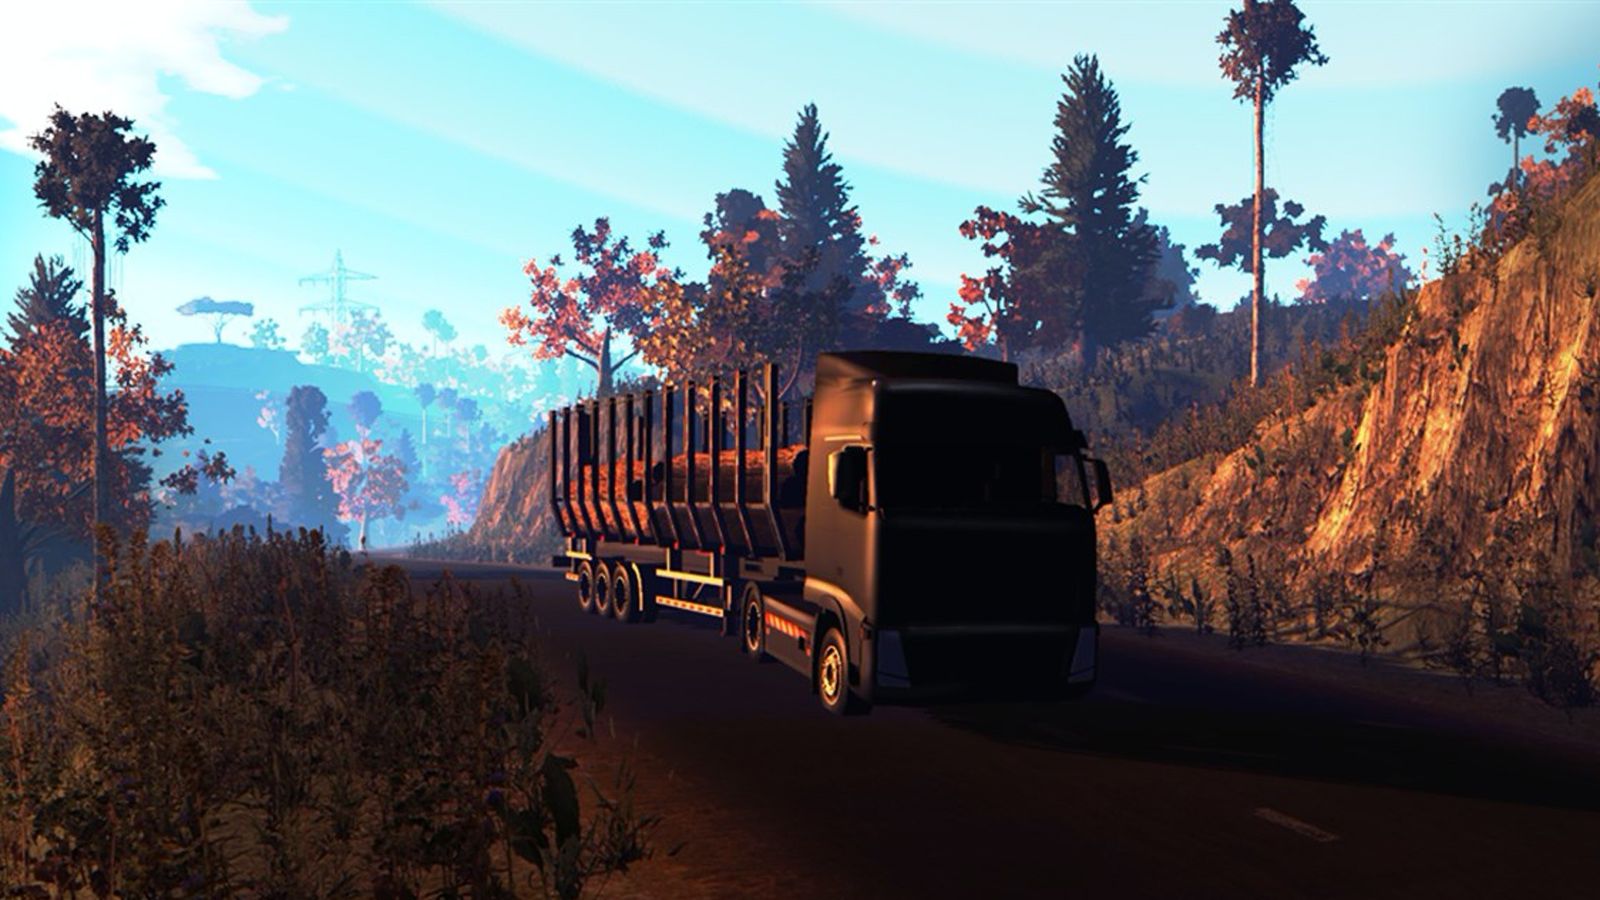 Image of a truck driving a country road in Euro Truck Simulator 2022.